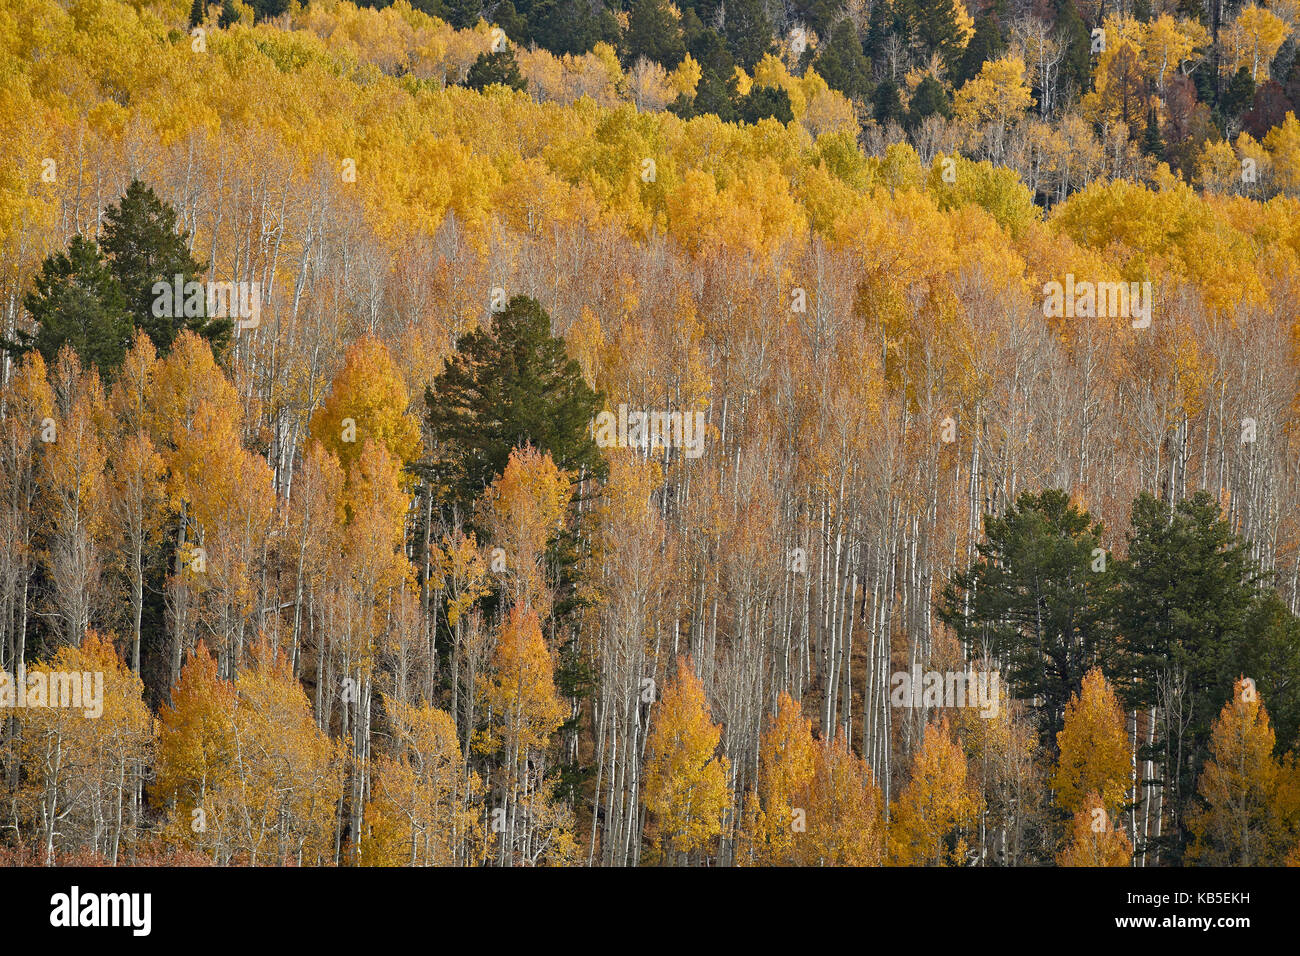 Yellow aspen trees in the fall, San Juan National Forest, Colorado, United States of America, North America Stock Photo